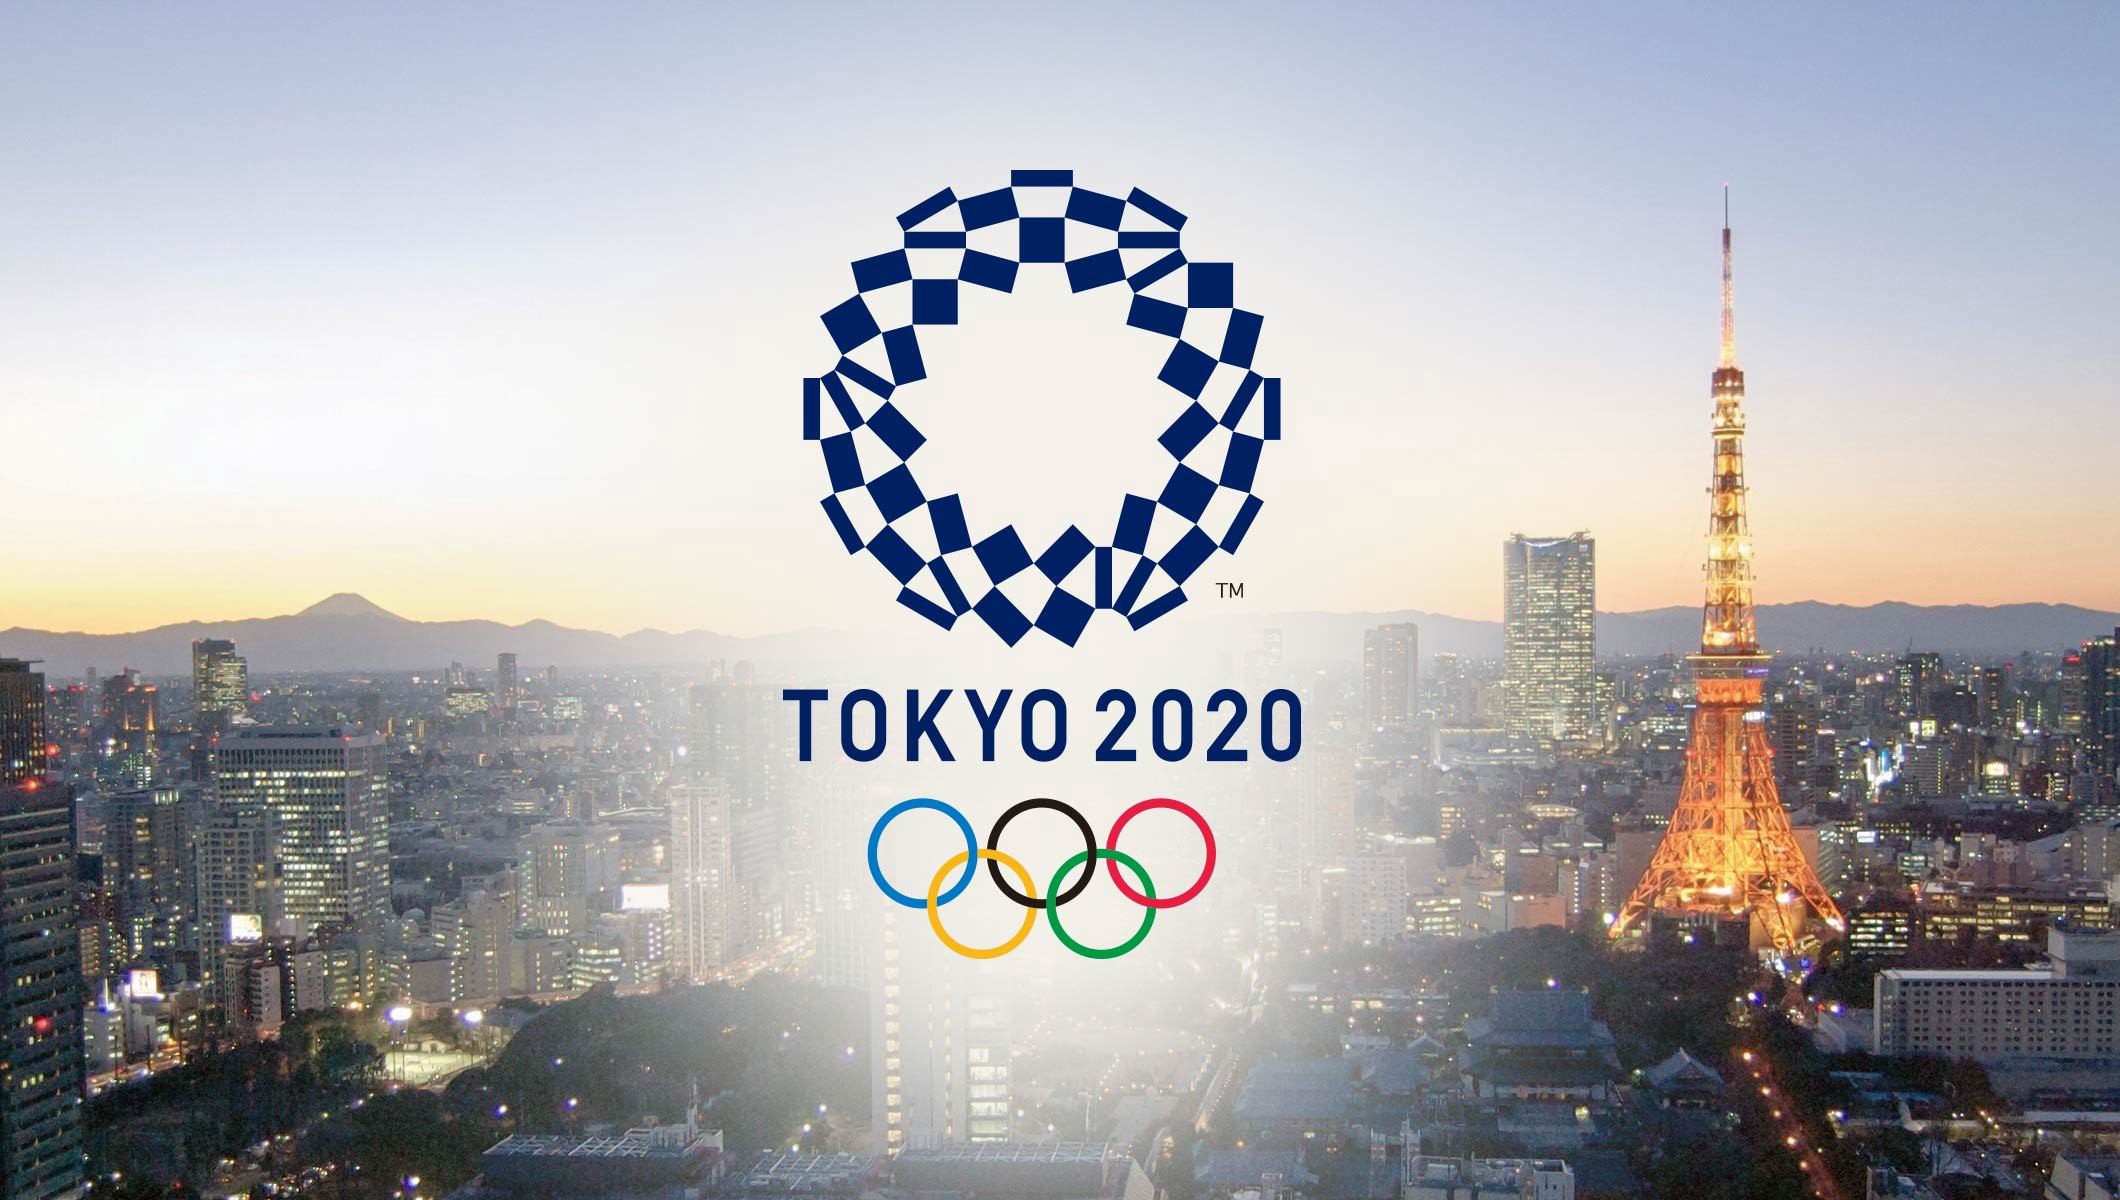 Indonesia Olympic Commitee - Indonesia offers to assist Tokyo Olympic preparation